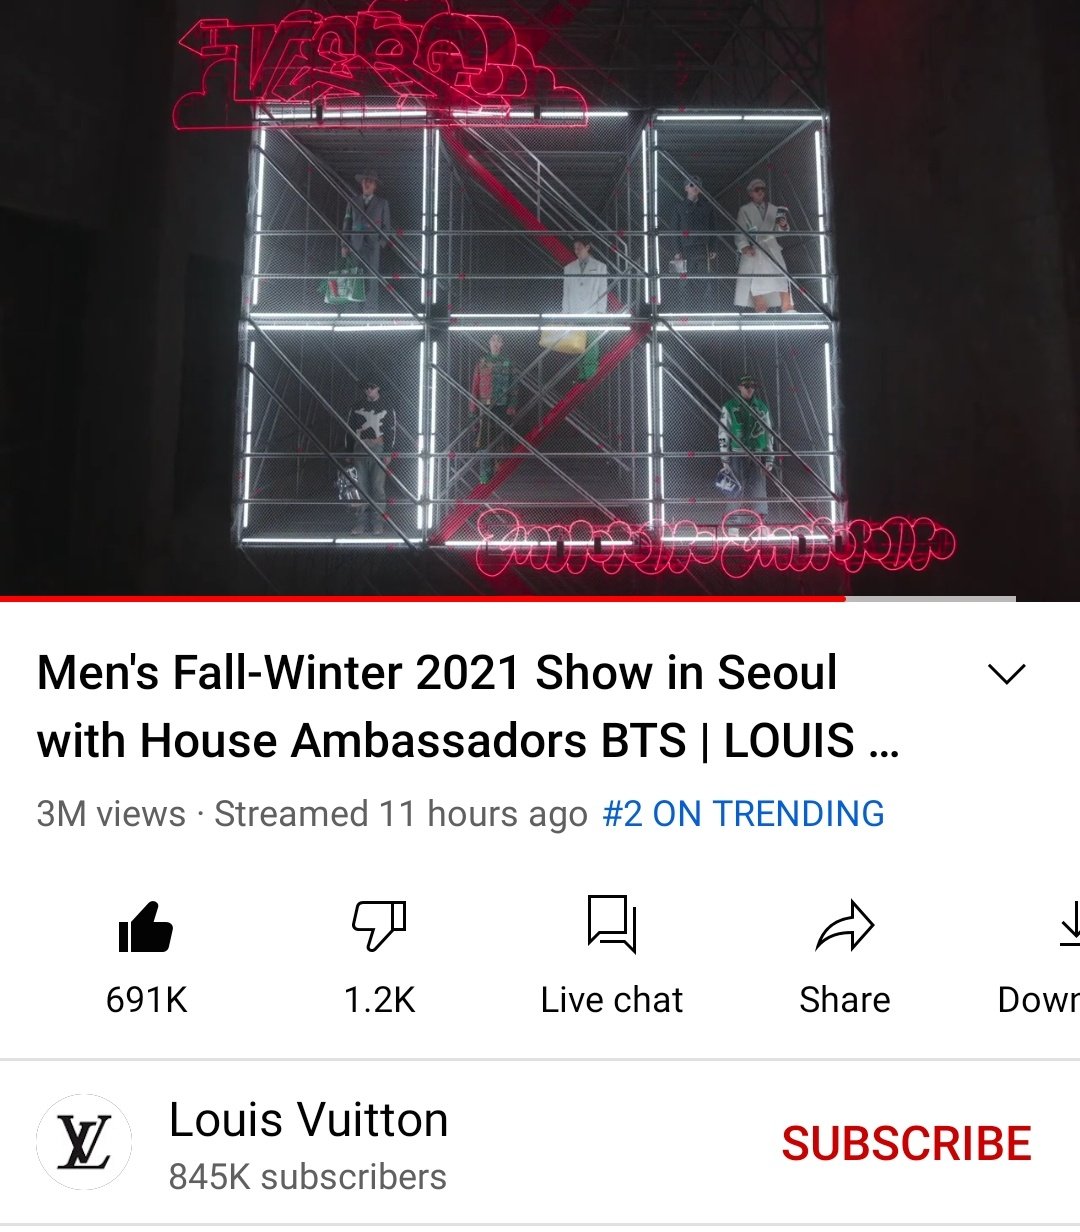 Men's Fall-Winter 2021 Show in Seoul with House Ambassadors BTS